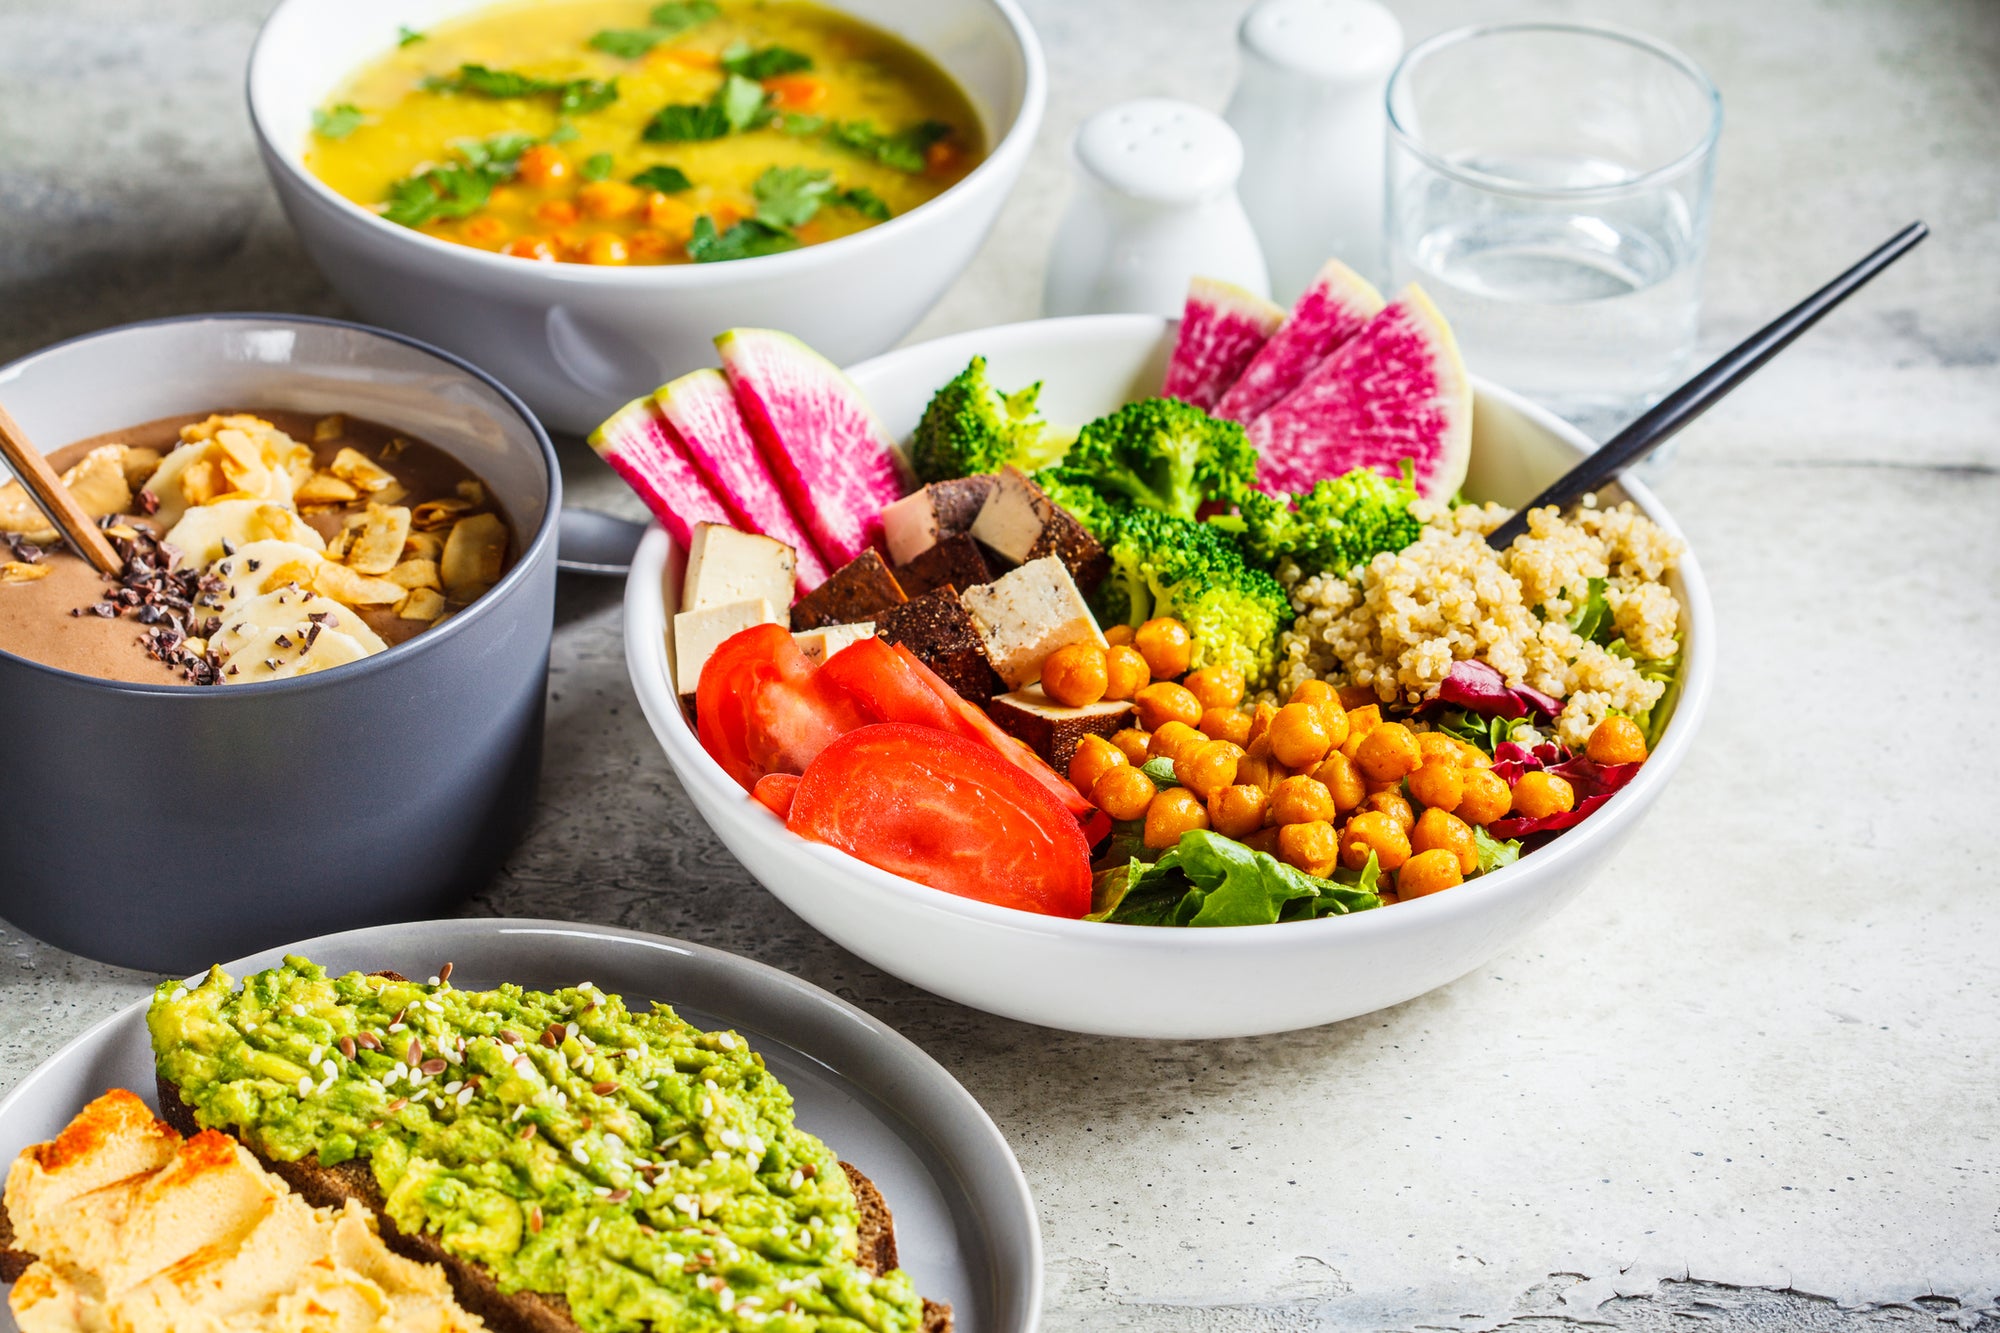 Bowls of plant-based food, fruits & vegetables such as chickpeas, tofu, guacamole, soup, and broccoli